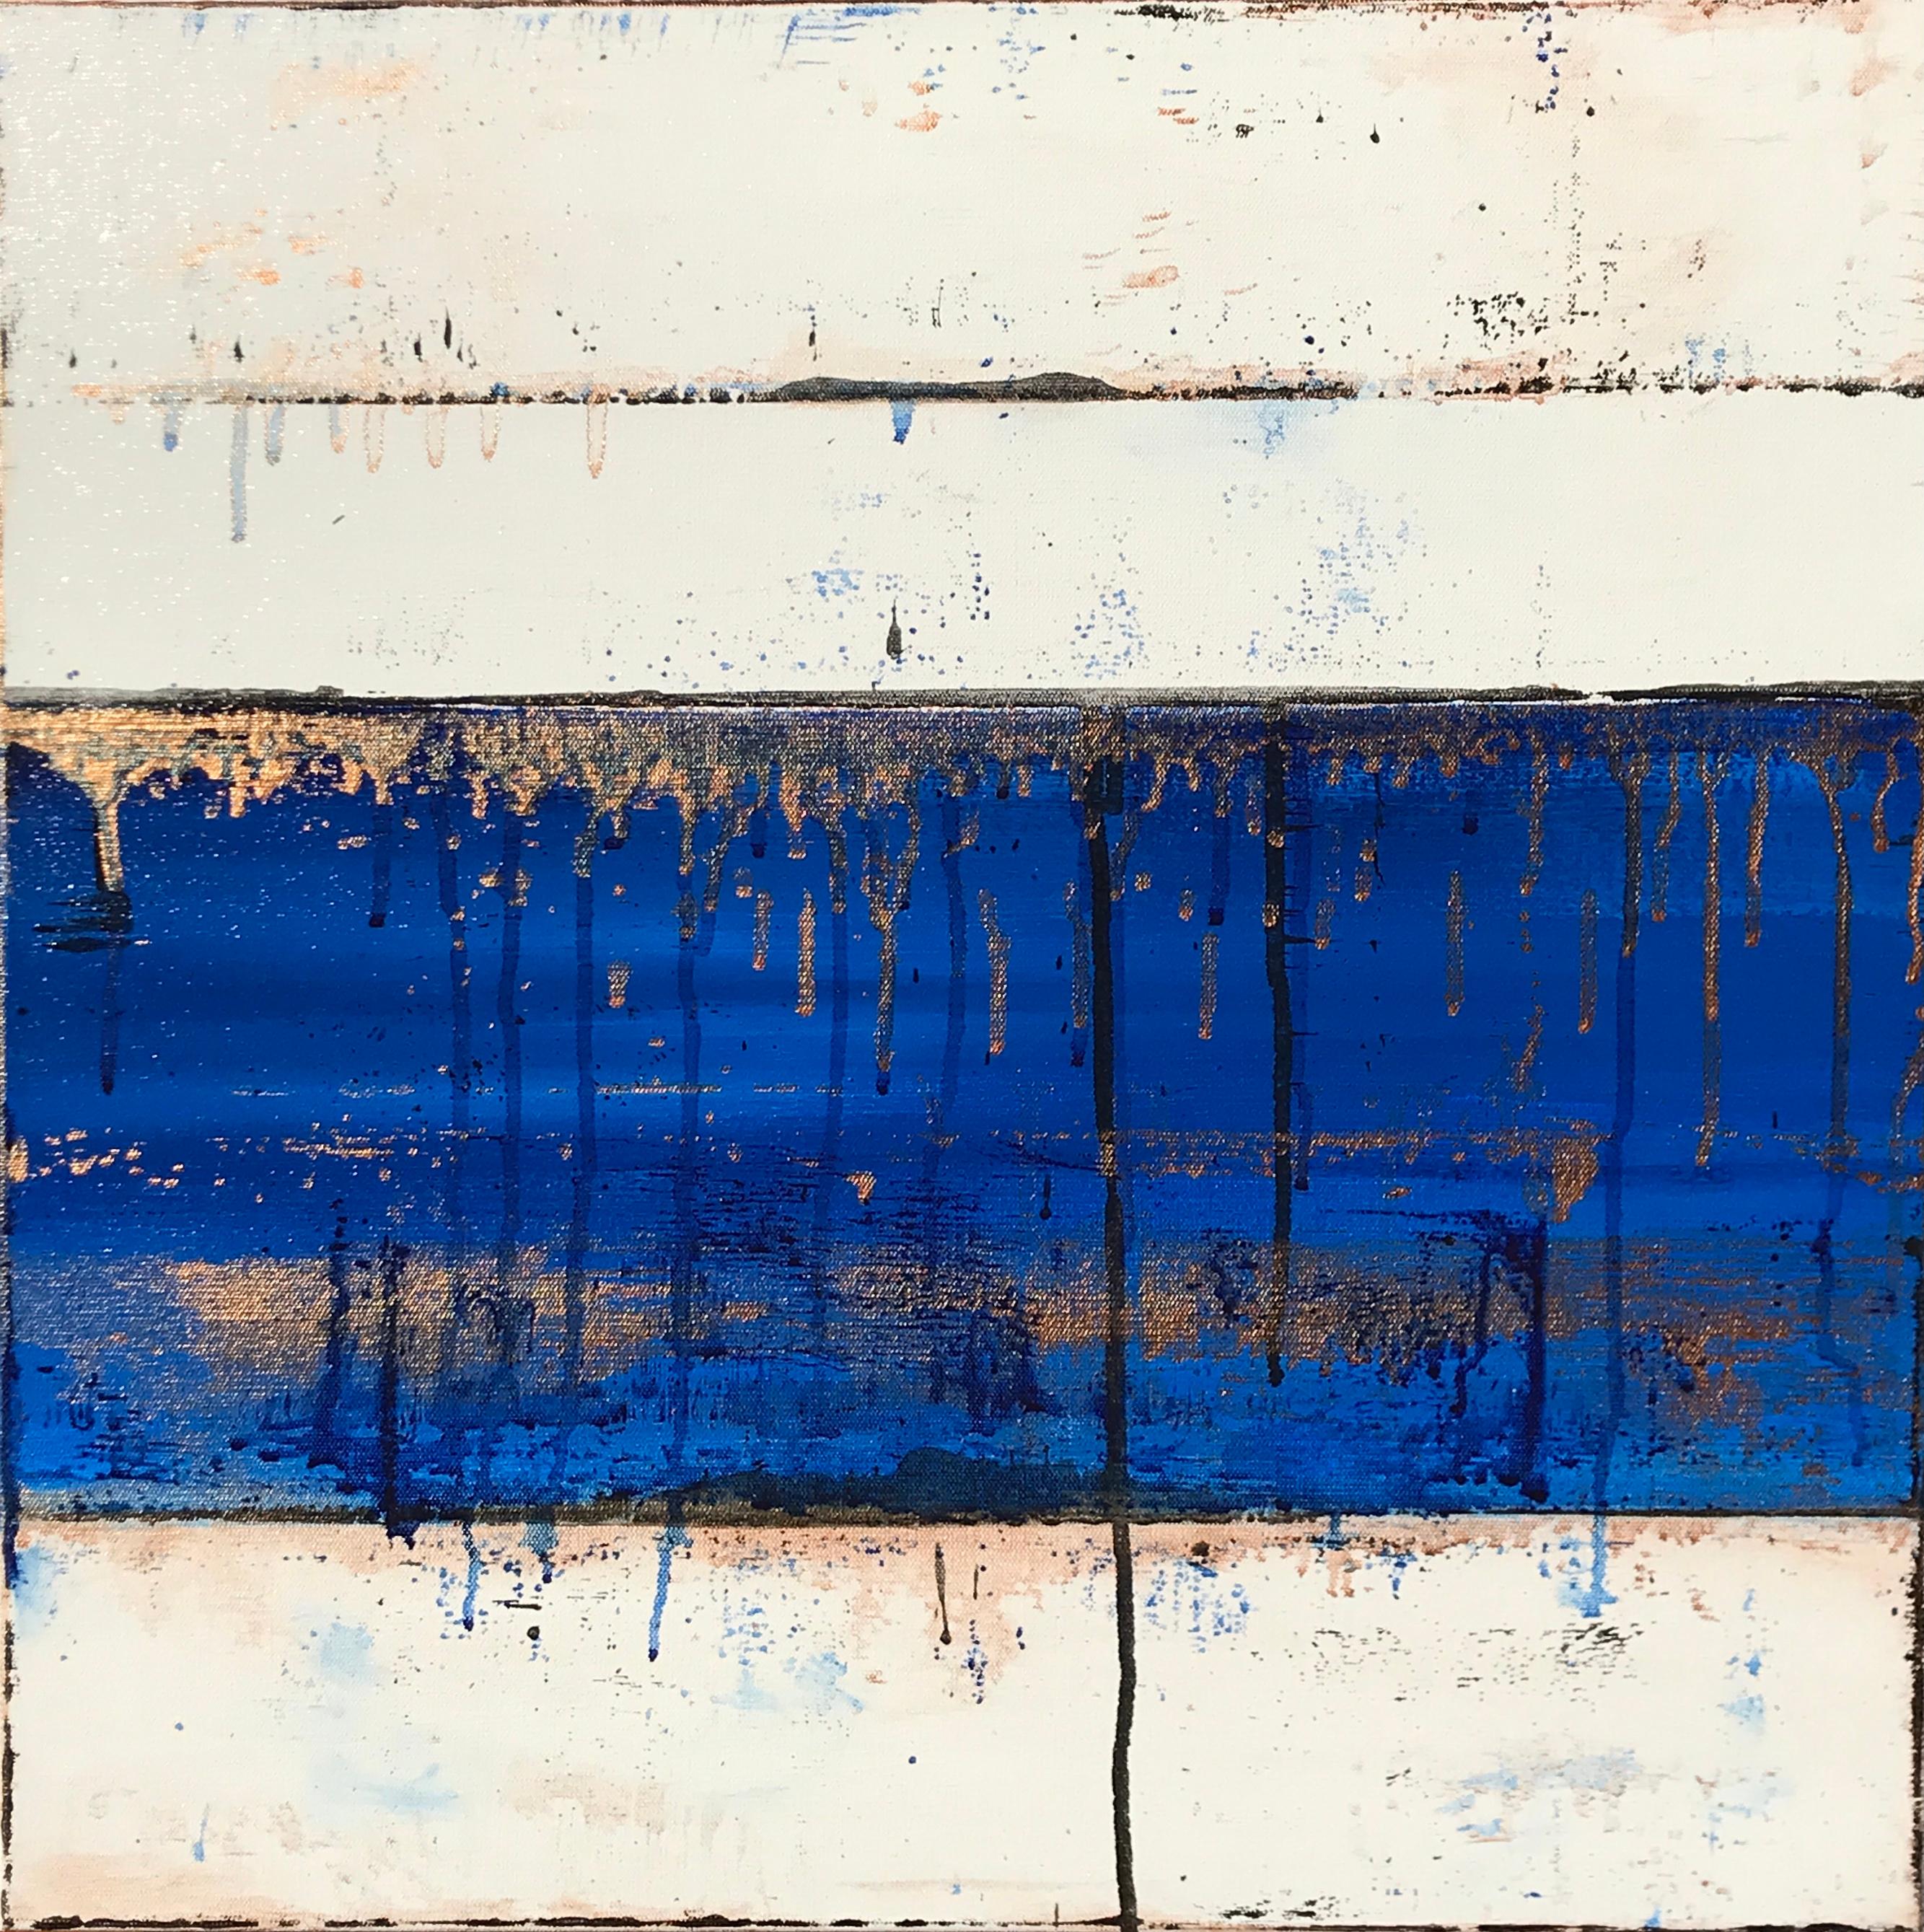 <p>Artist Comments<br />"This piece celebrates the horizon," shares artist Teresa Dirks. "No matter who you are or where you live, you have a horizon, a sunset, a connection to humanity that each of us has experienced. That linear string ties us